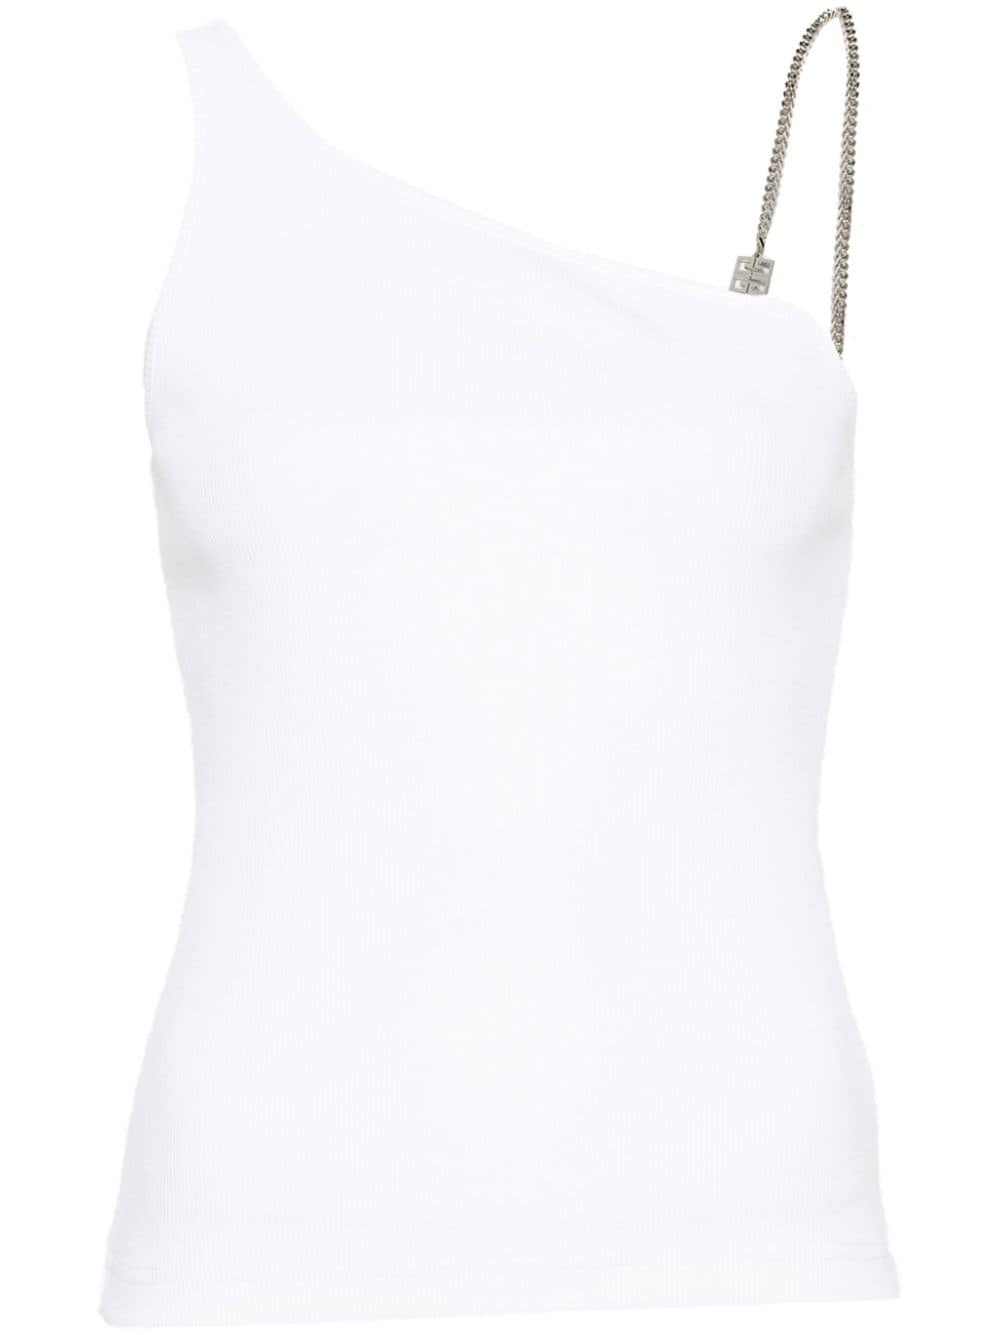 Givenchy Top White